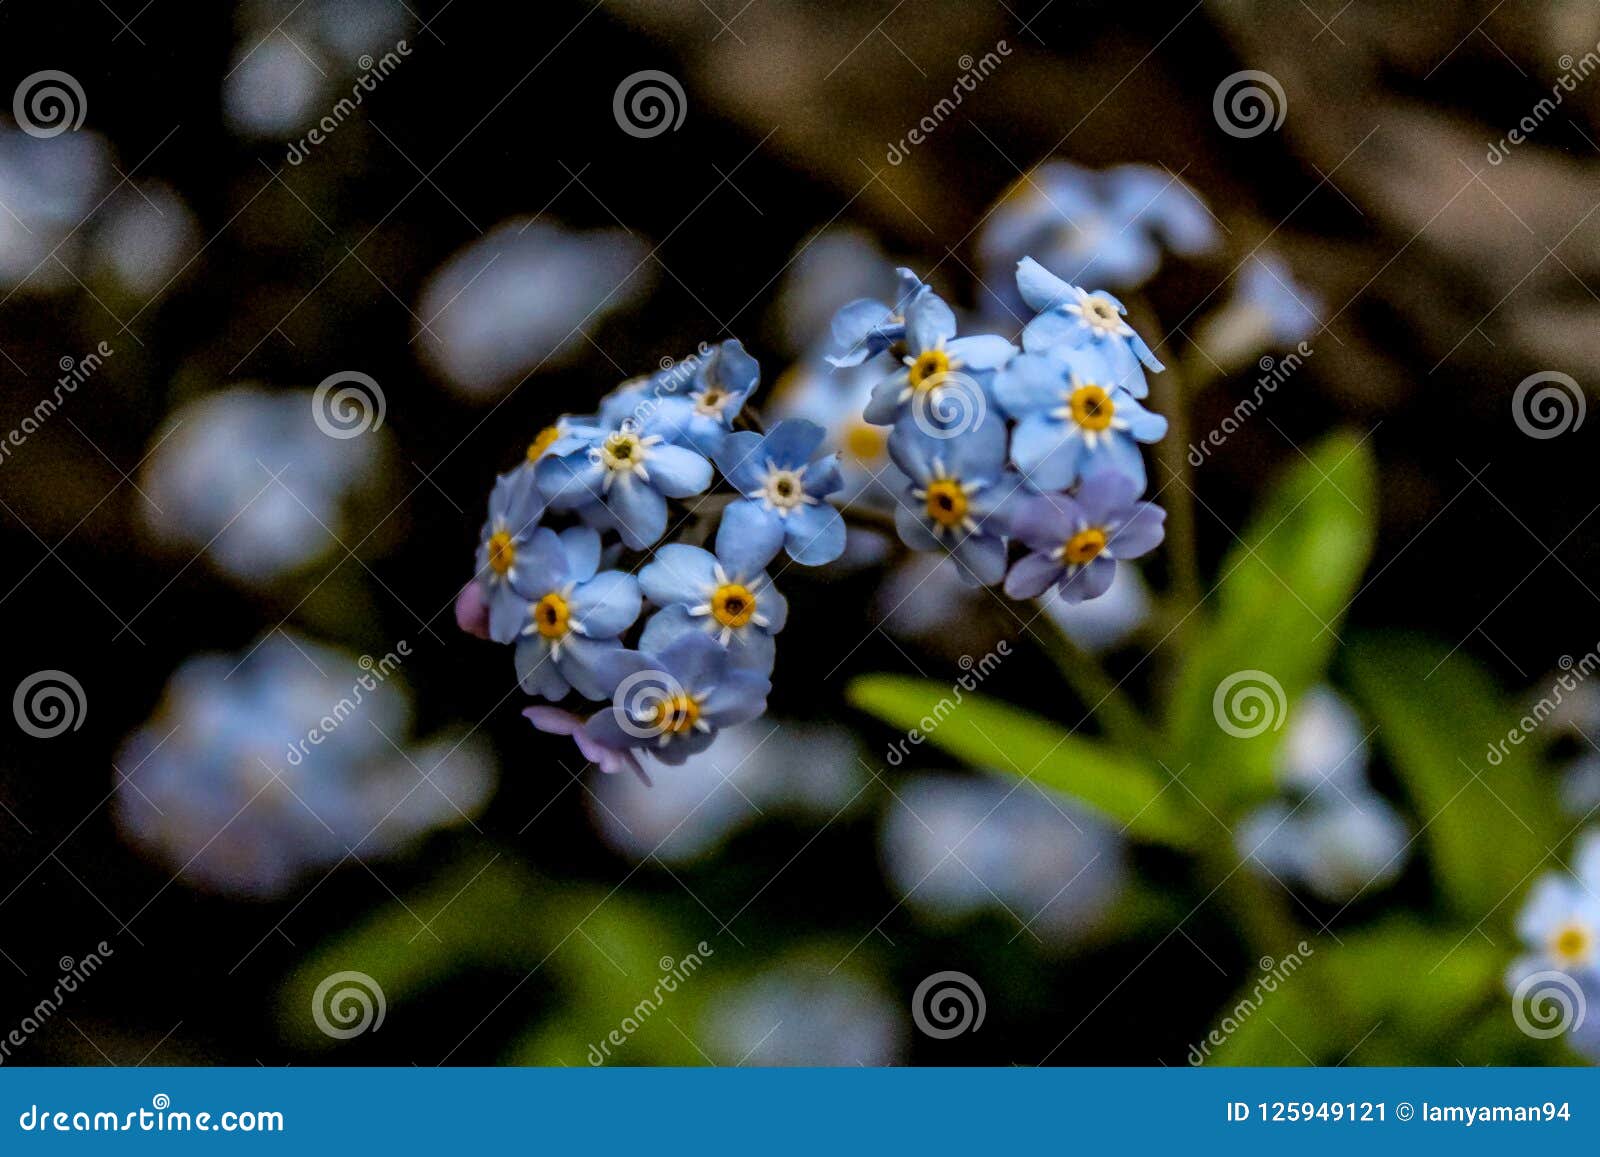 Small blue flowers with yellow centers for medicare juniper network connect port